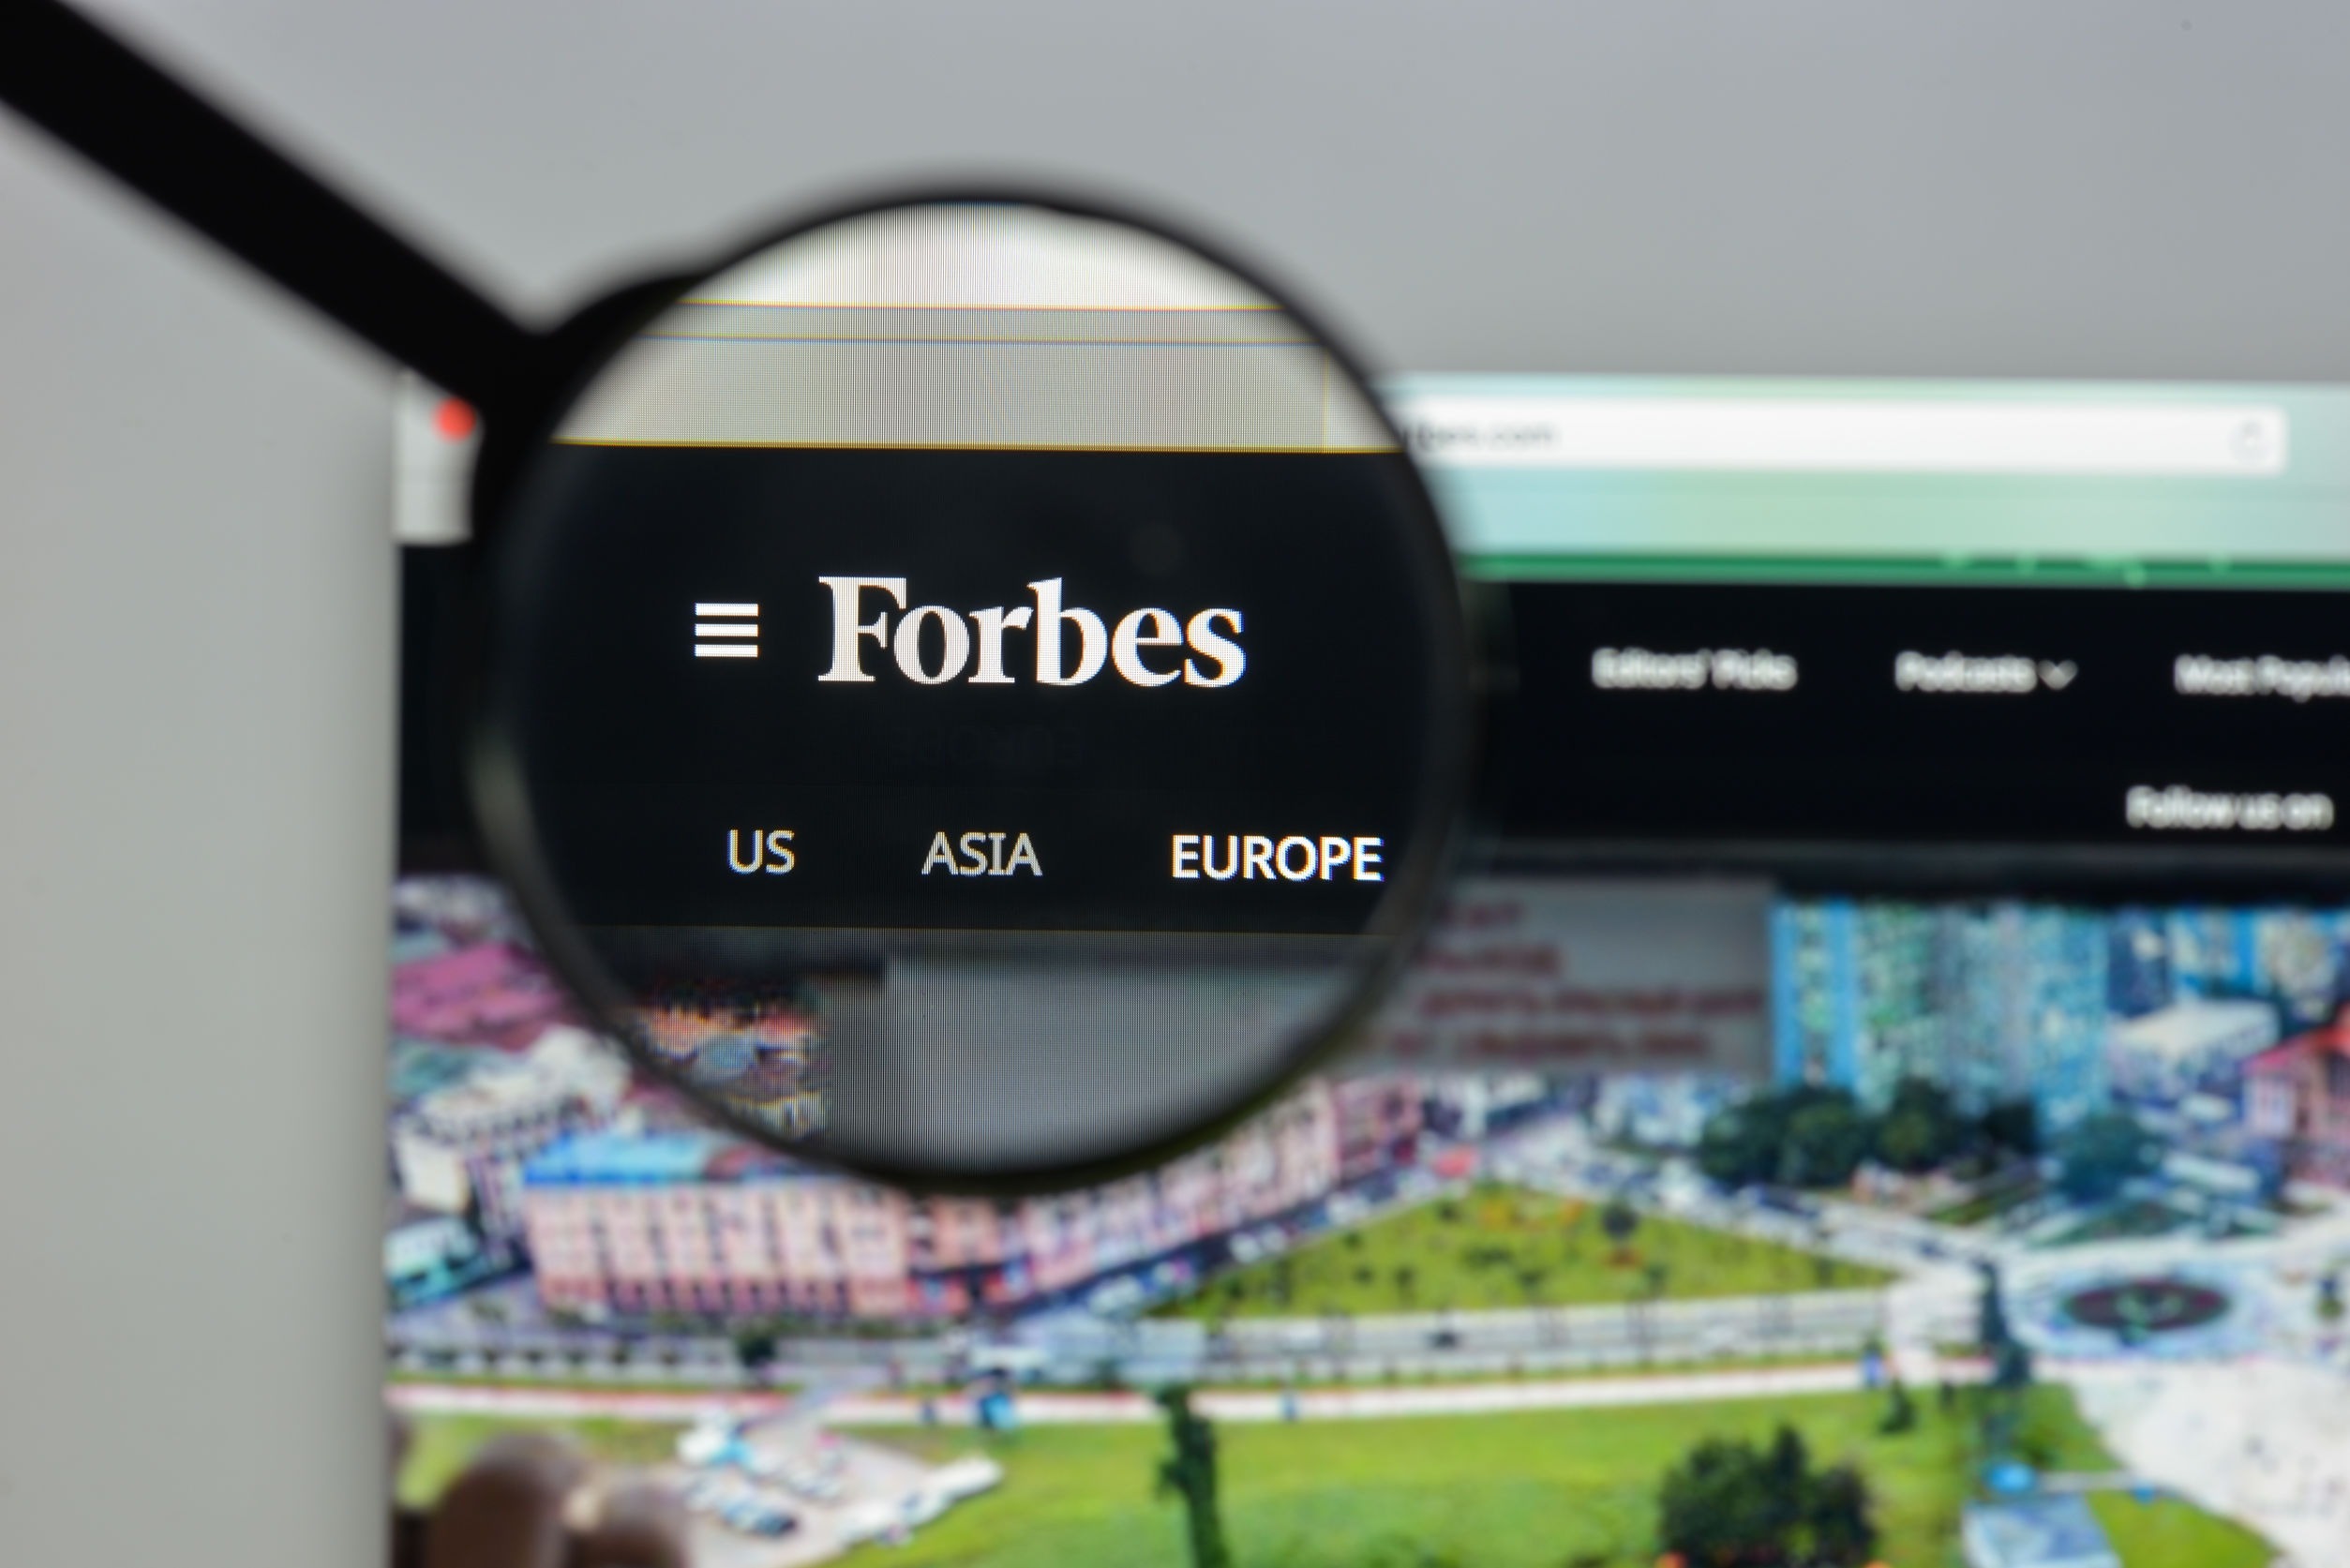 Forbes-statement-PR-implications